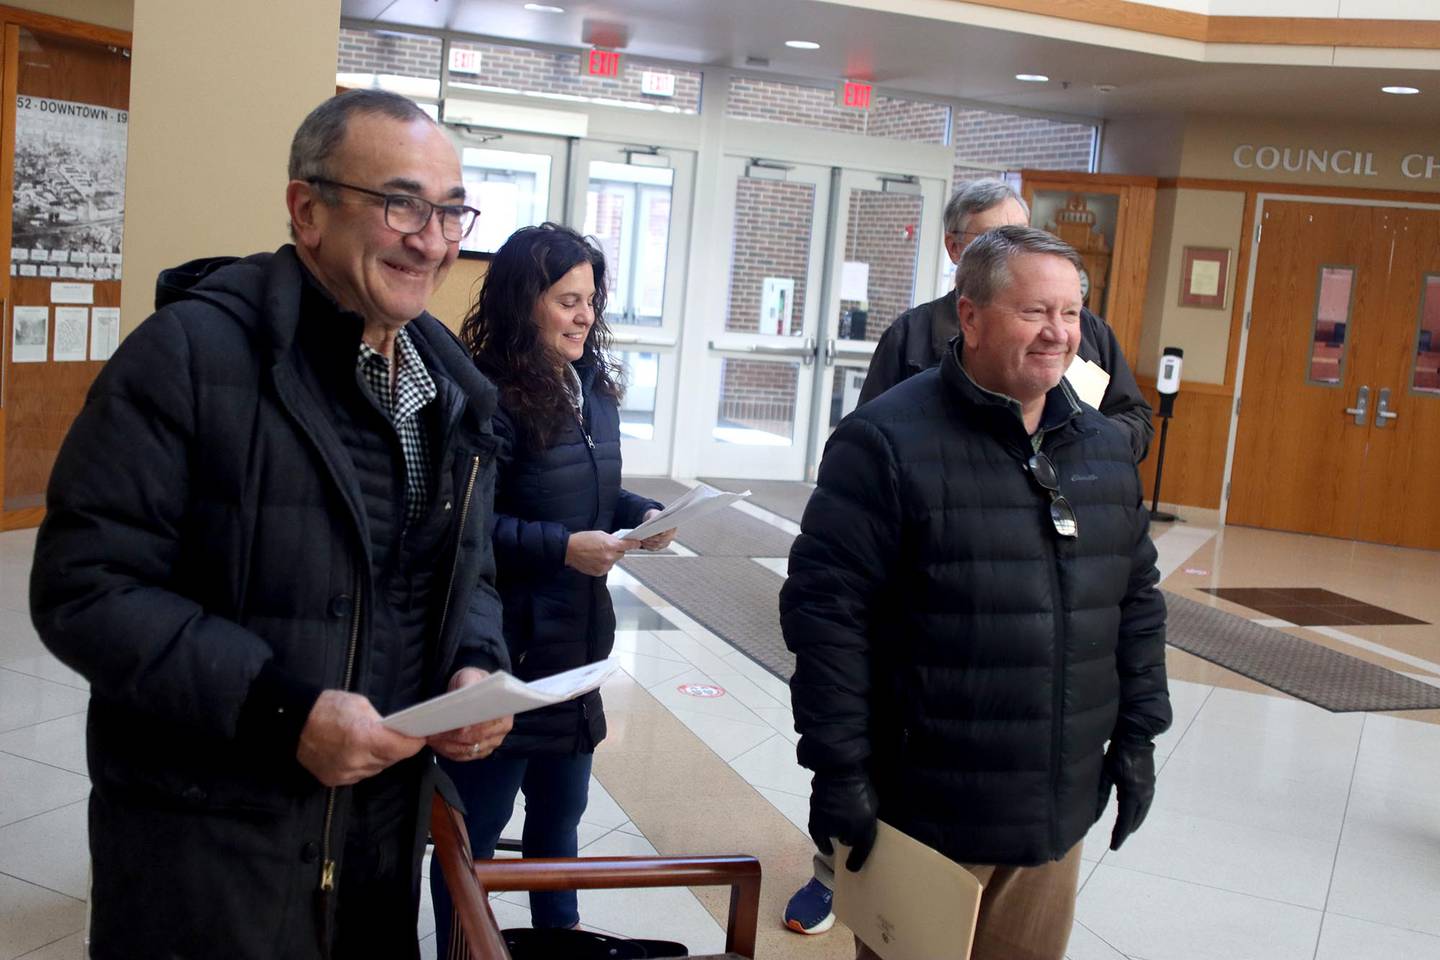 Candidates filed the morning of Monday, Nov. 21, 2022, at Crystal Lake City Hall to run in city political races. Current Mayor Haig Haleblian, left, was among the candidates filing.